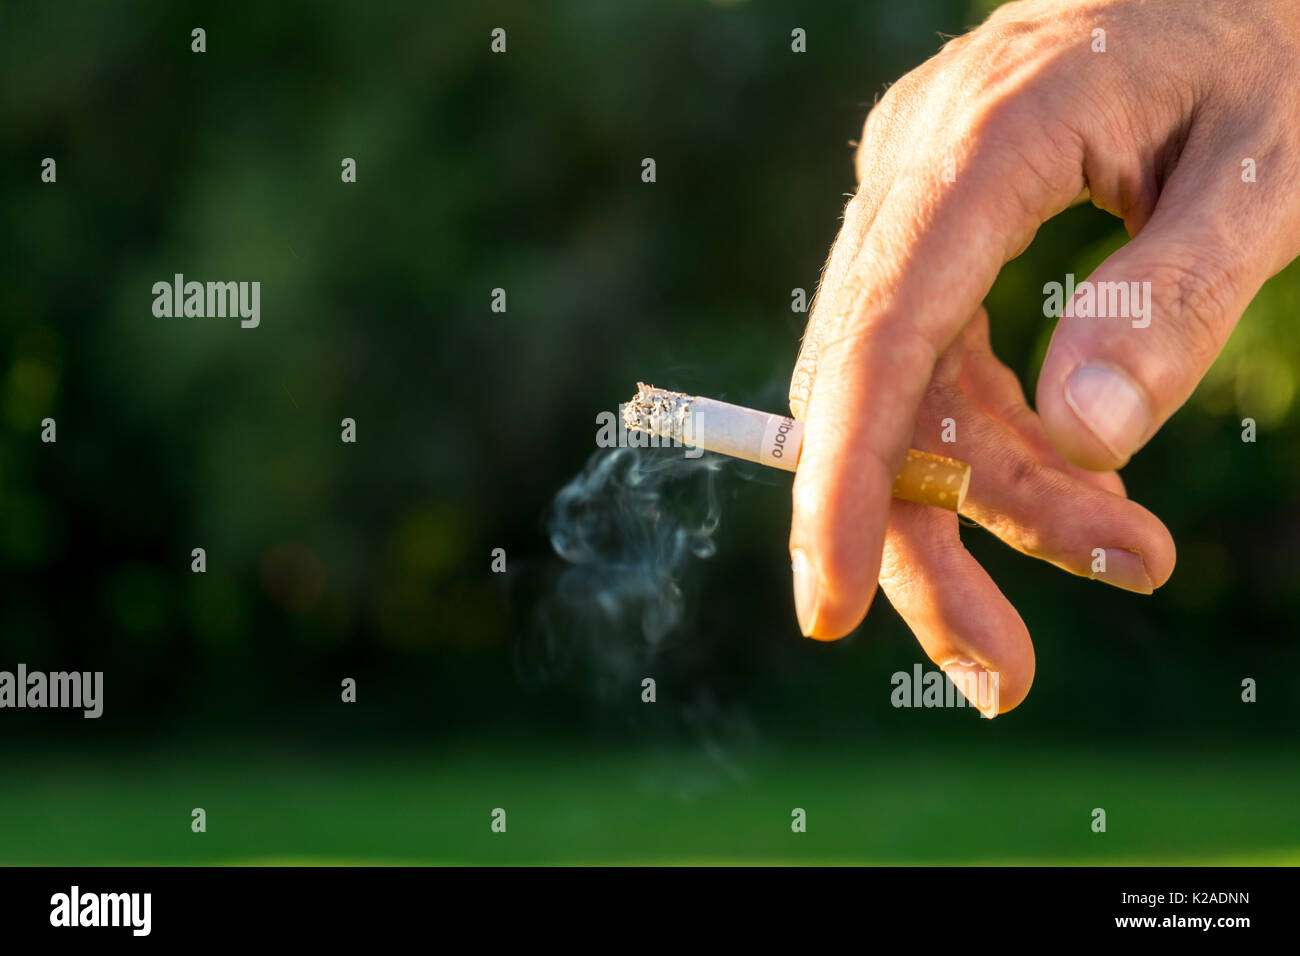 A burning cigarette in the hand of a male against green background Stock Photo